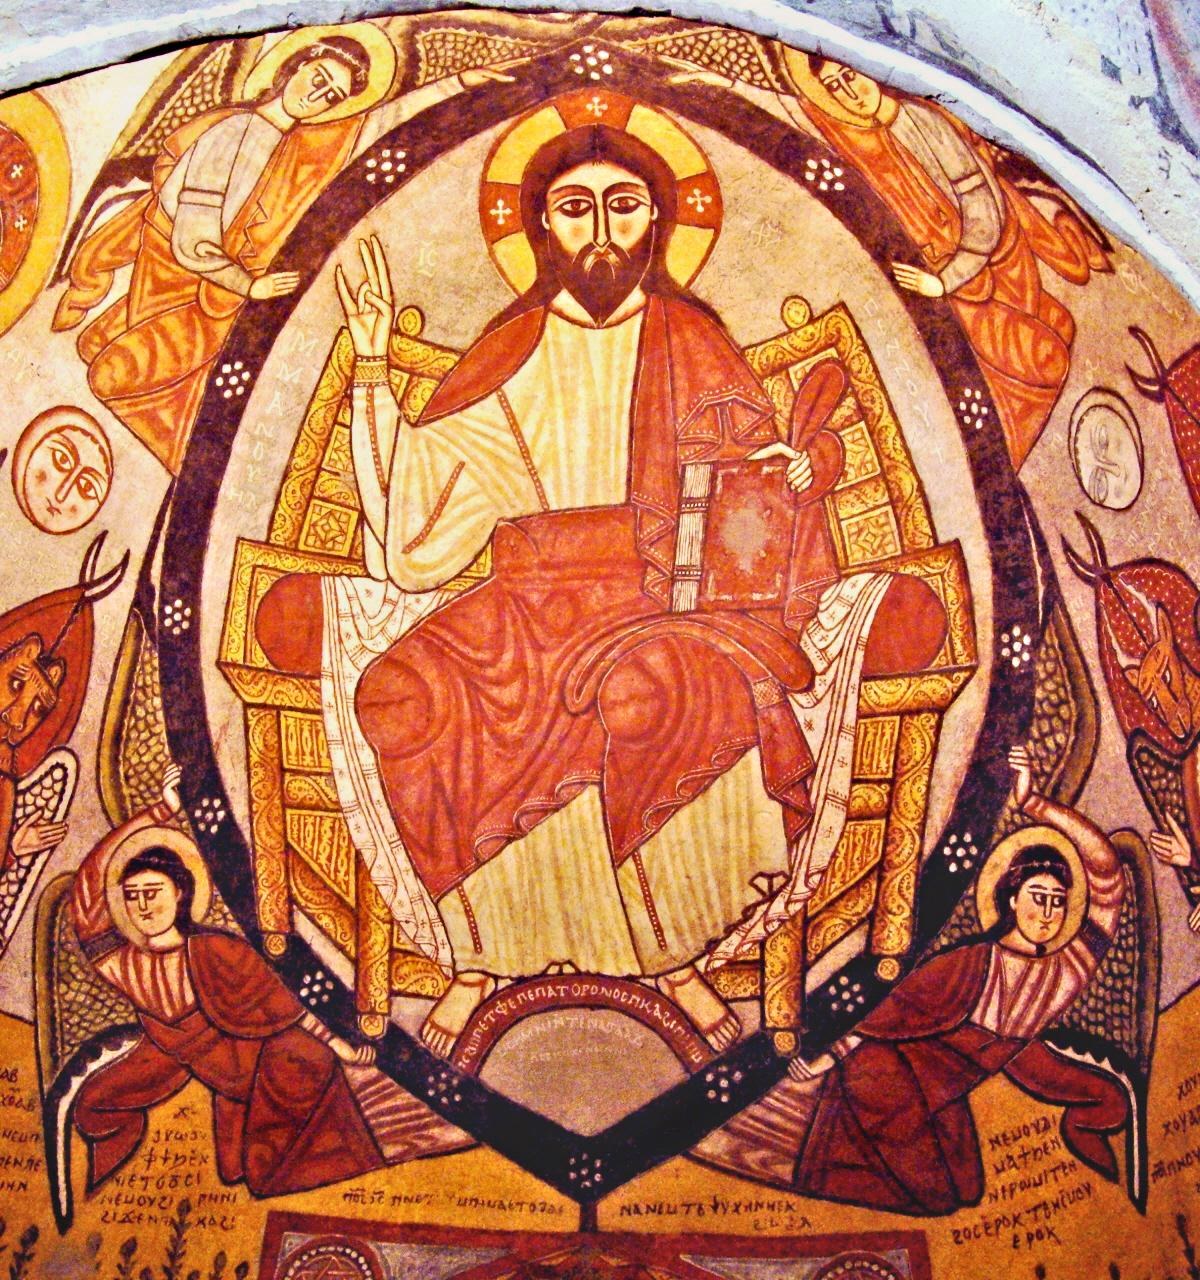 unknown-artist-christ-pantocrator-church-of-the-monastery-of-st-anthony-the-great-coptic-12th-century.jpg